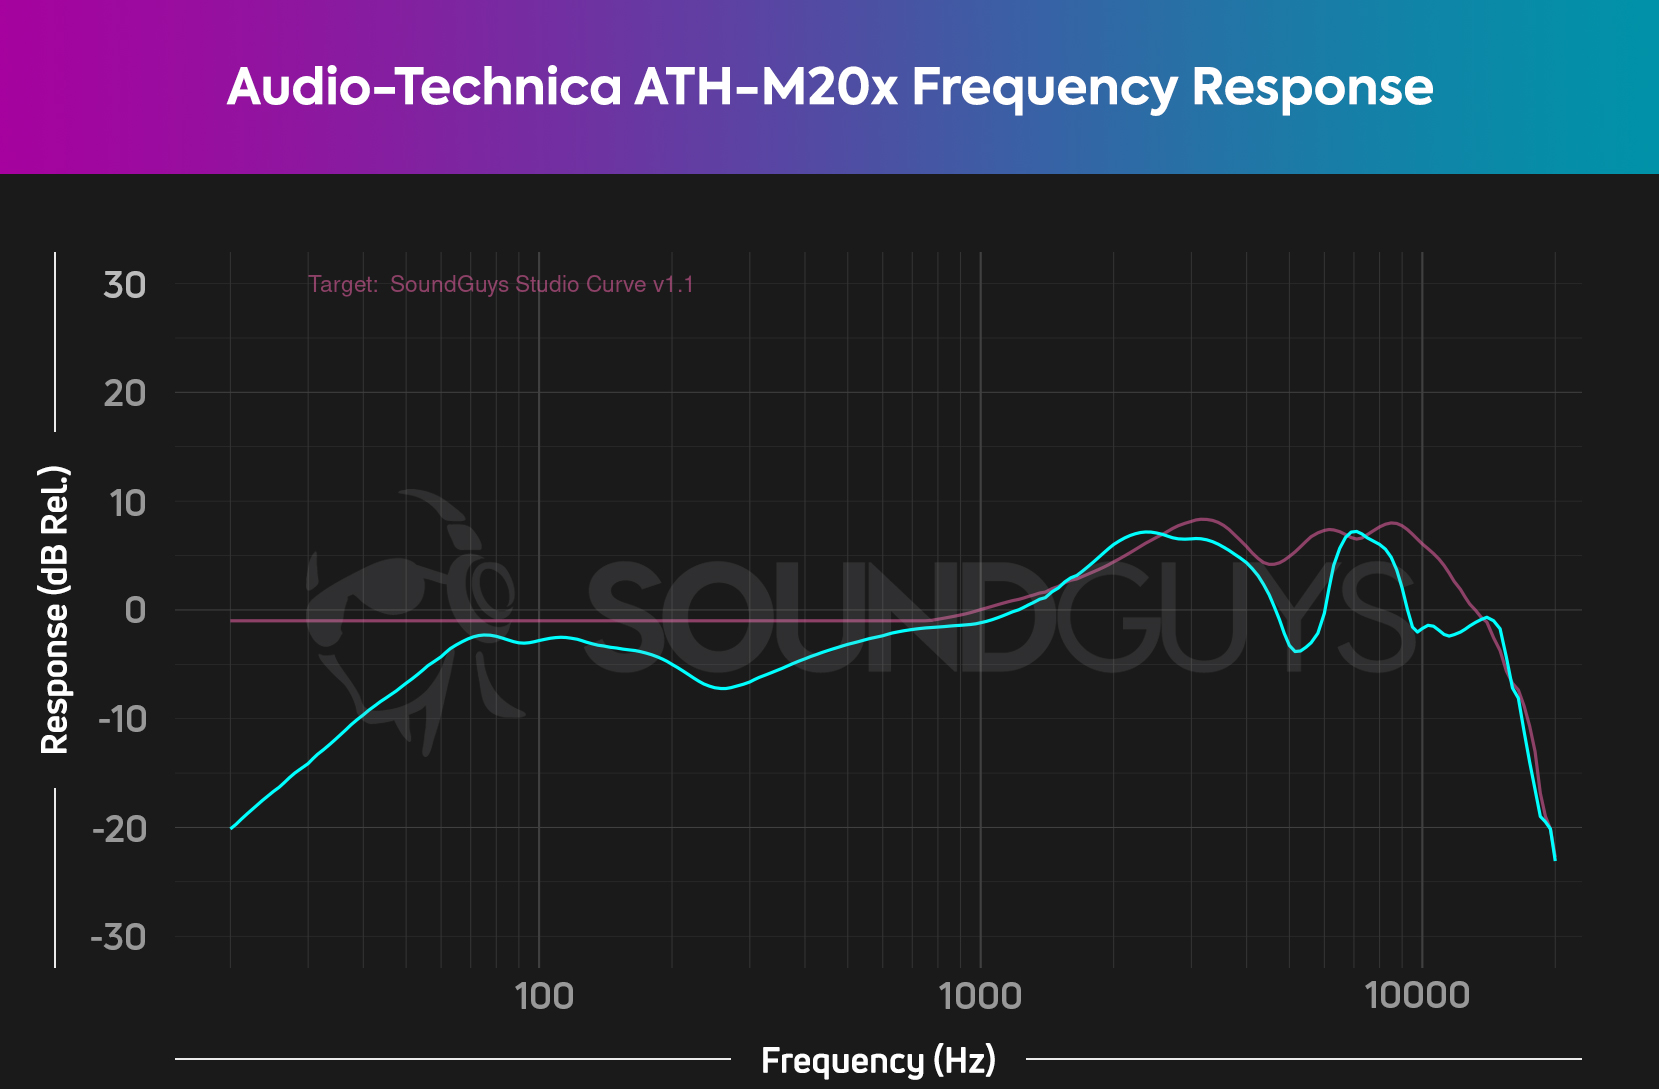 The frequency response of the Audio-Technica ATH-M20x mostly under-emphasizes compared to our house chart.